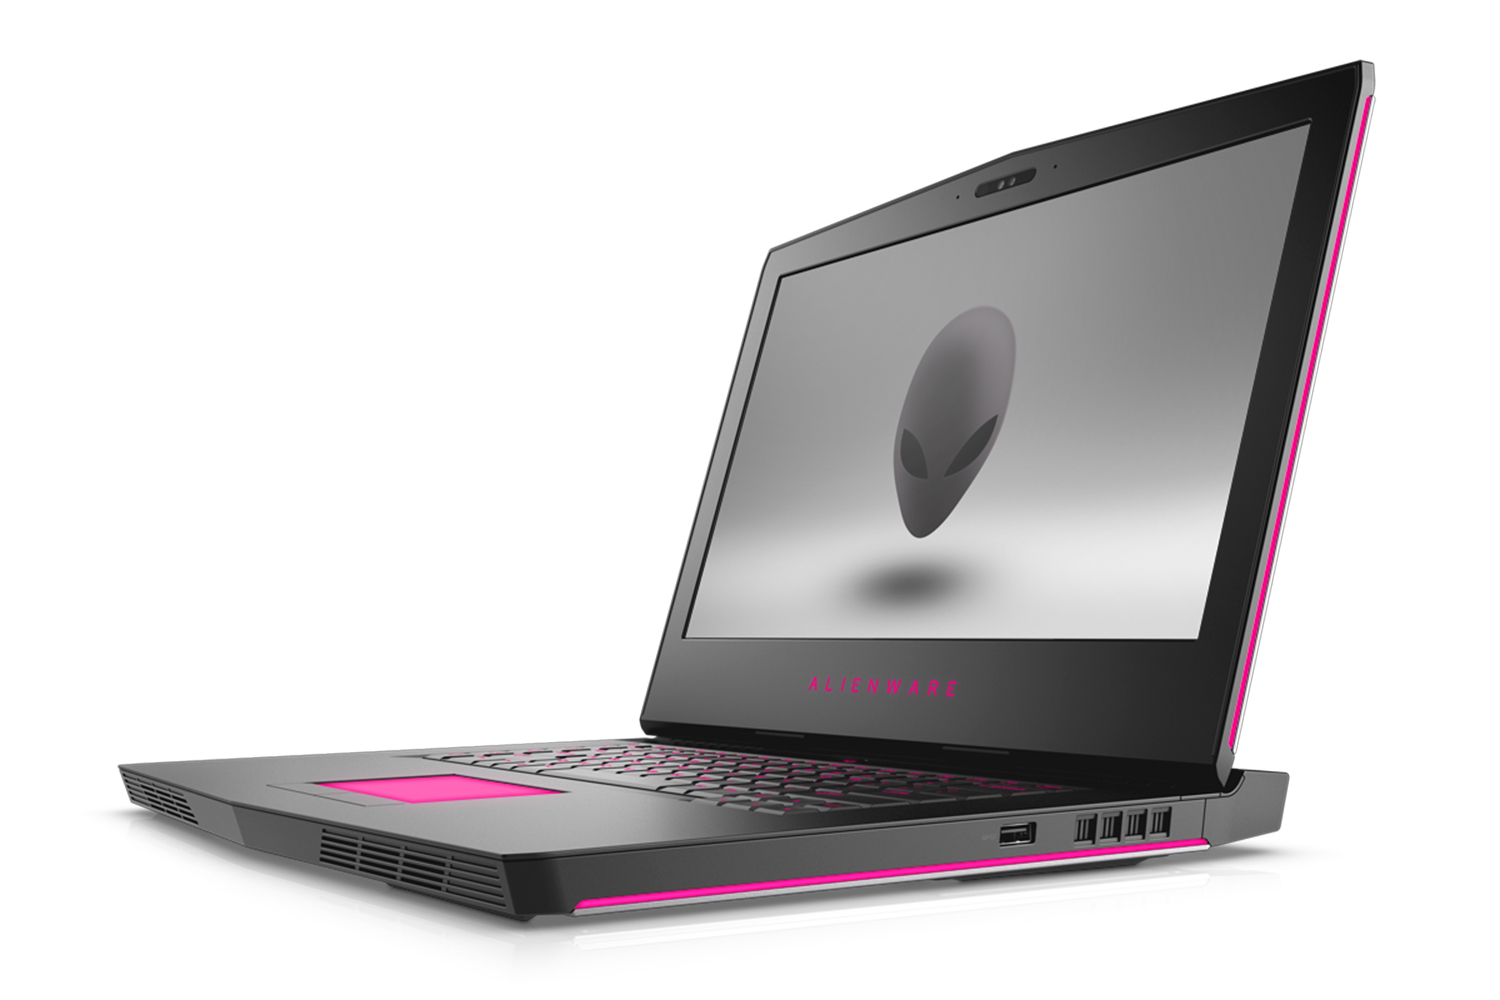 dell alienware inspiron 7000 gaming laptops refresh intel seventh gen cpu aw 15 02